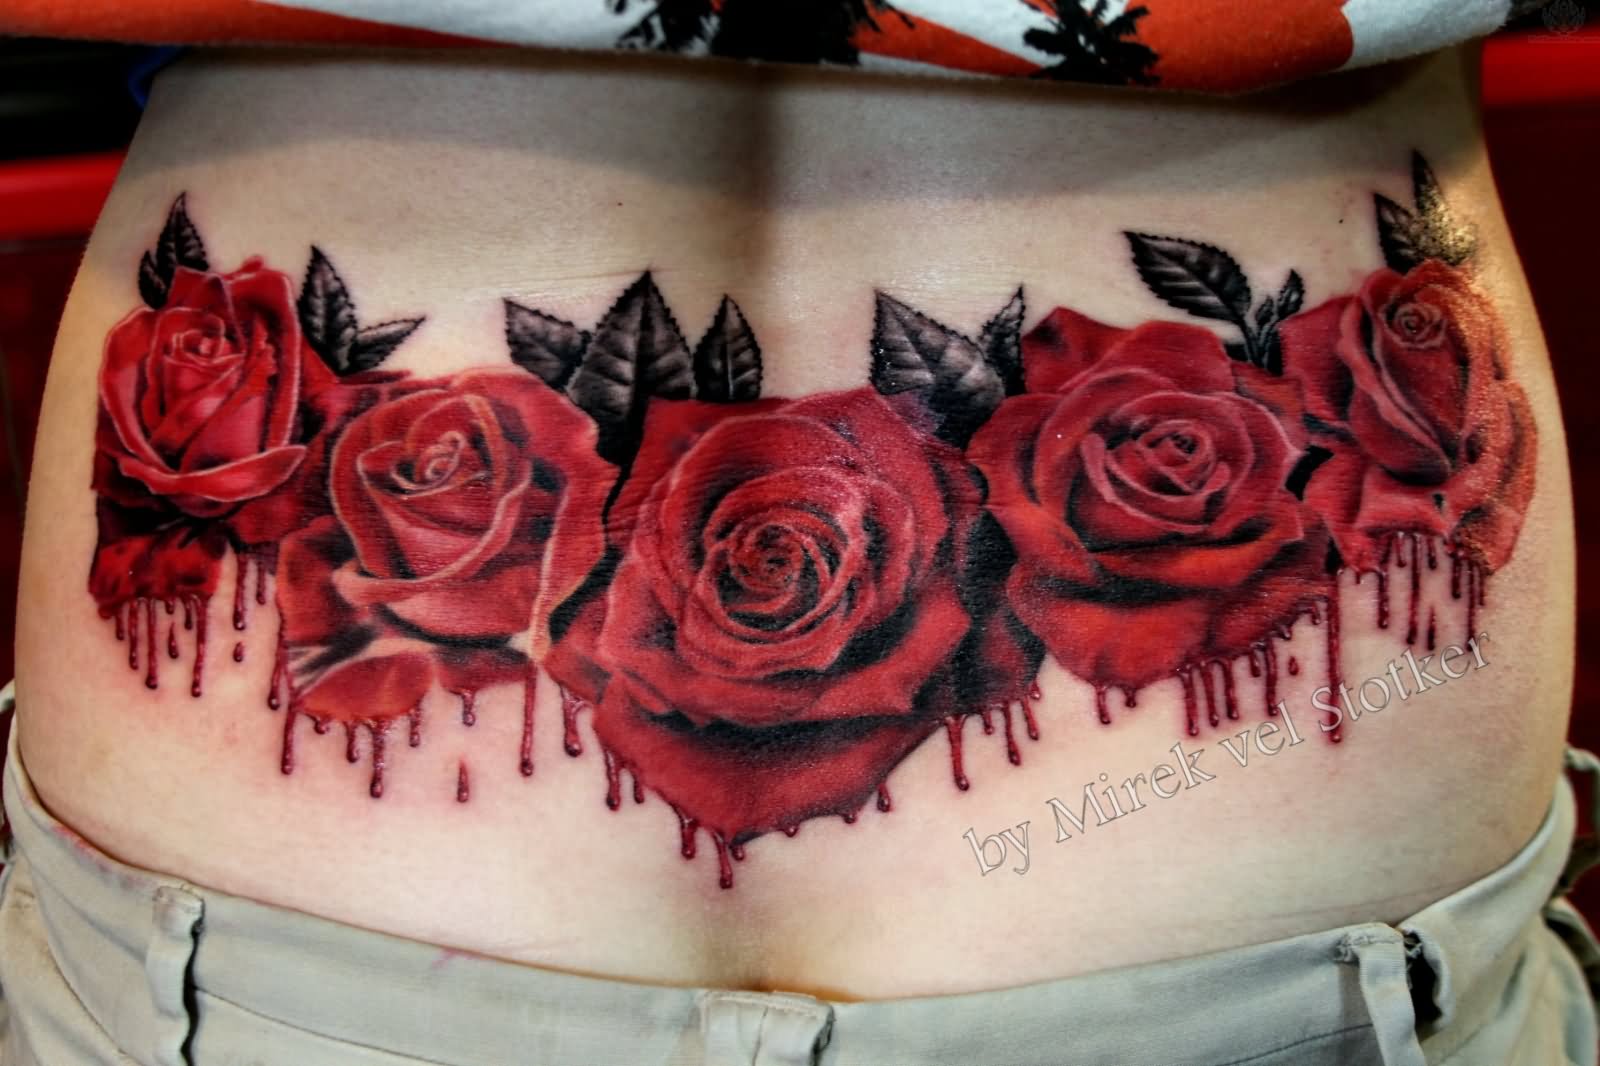 Lower back red roses with gray leaves tattoo design for women